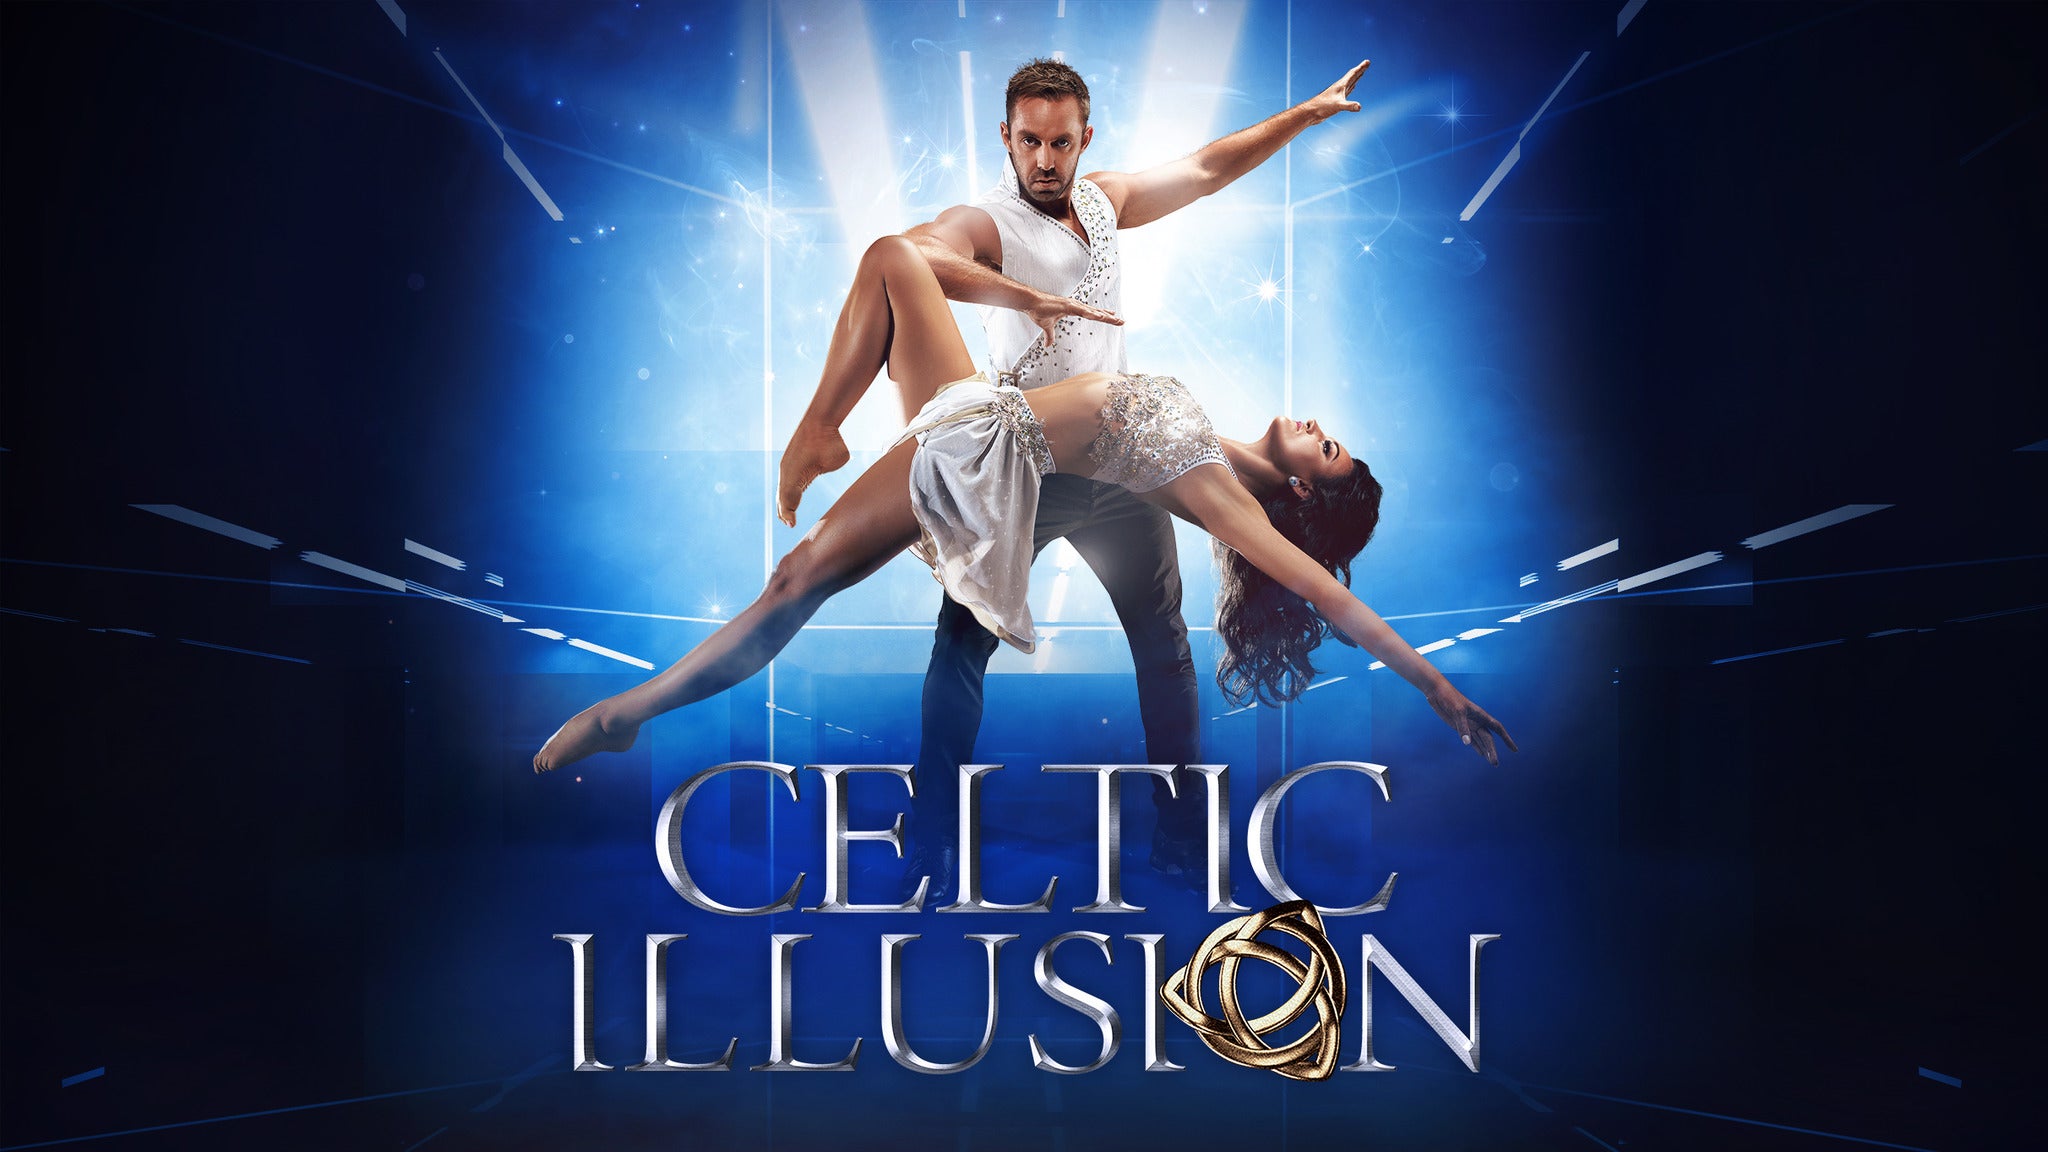 Celtic Illusion in Thunder Bay promo photo for Exclusive presale offer code